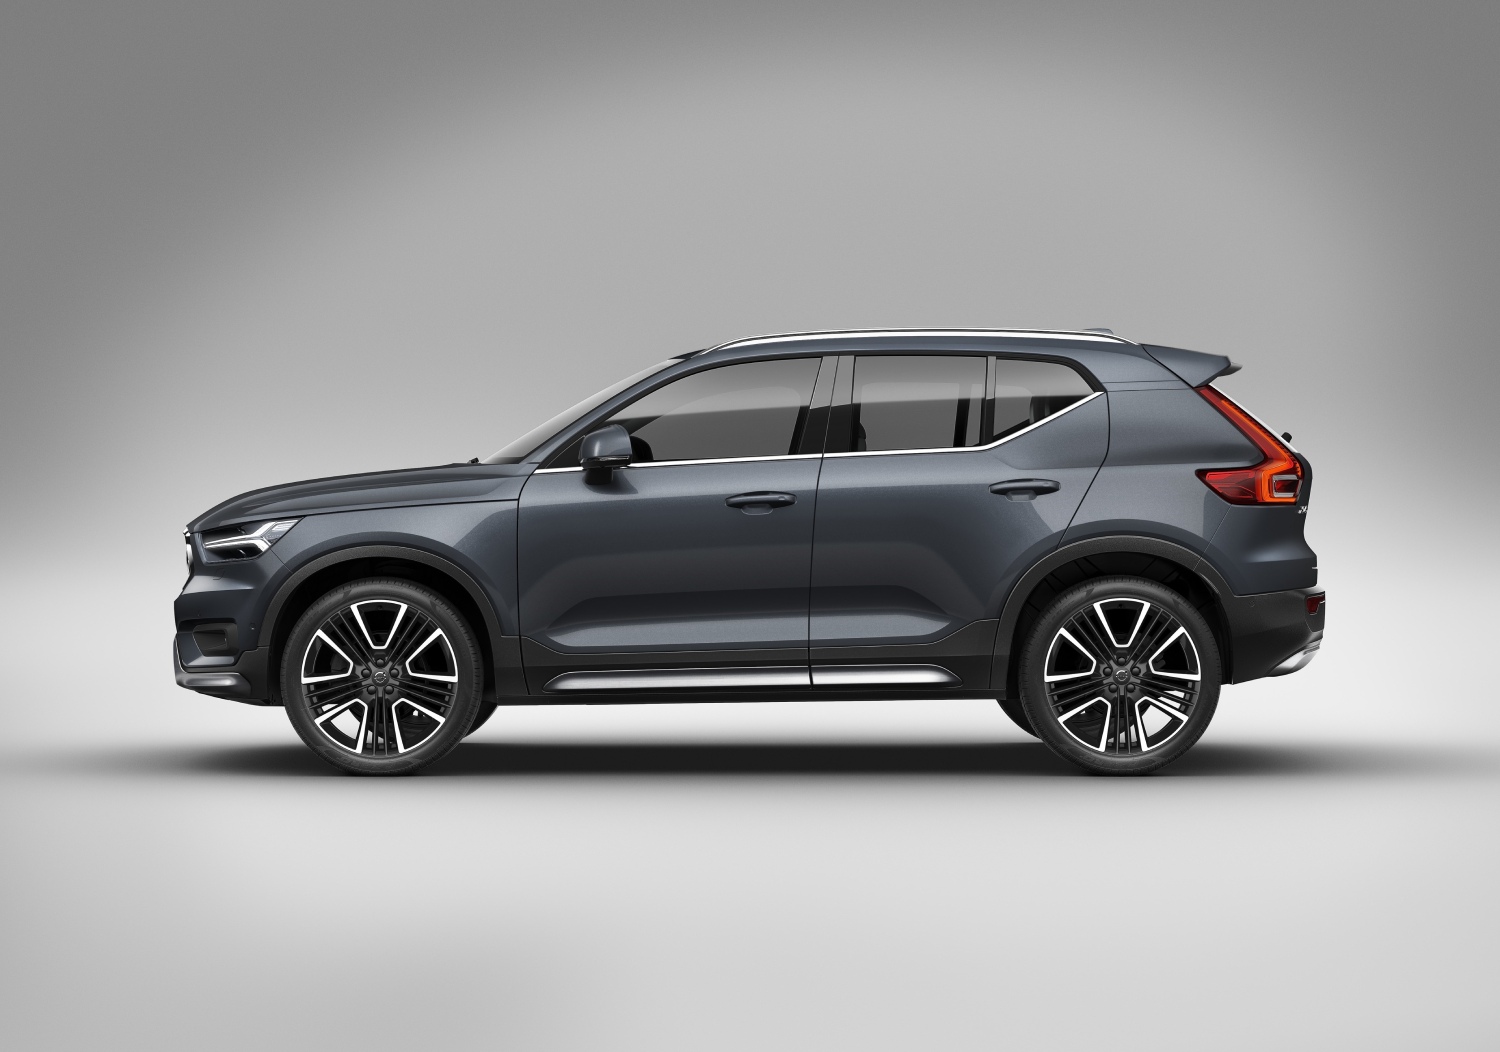 Affordable used SUVs with the most technology include this Volvo XC40